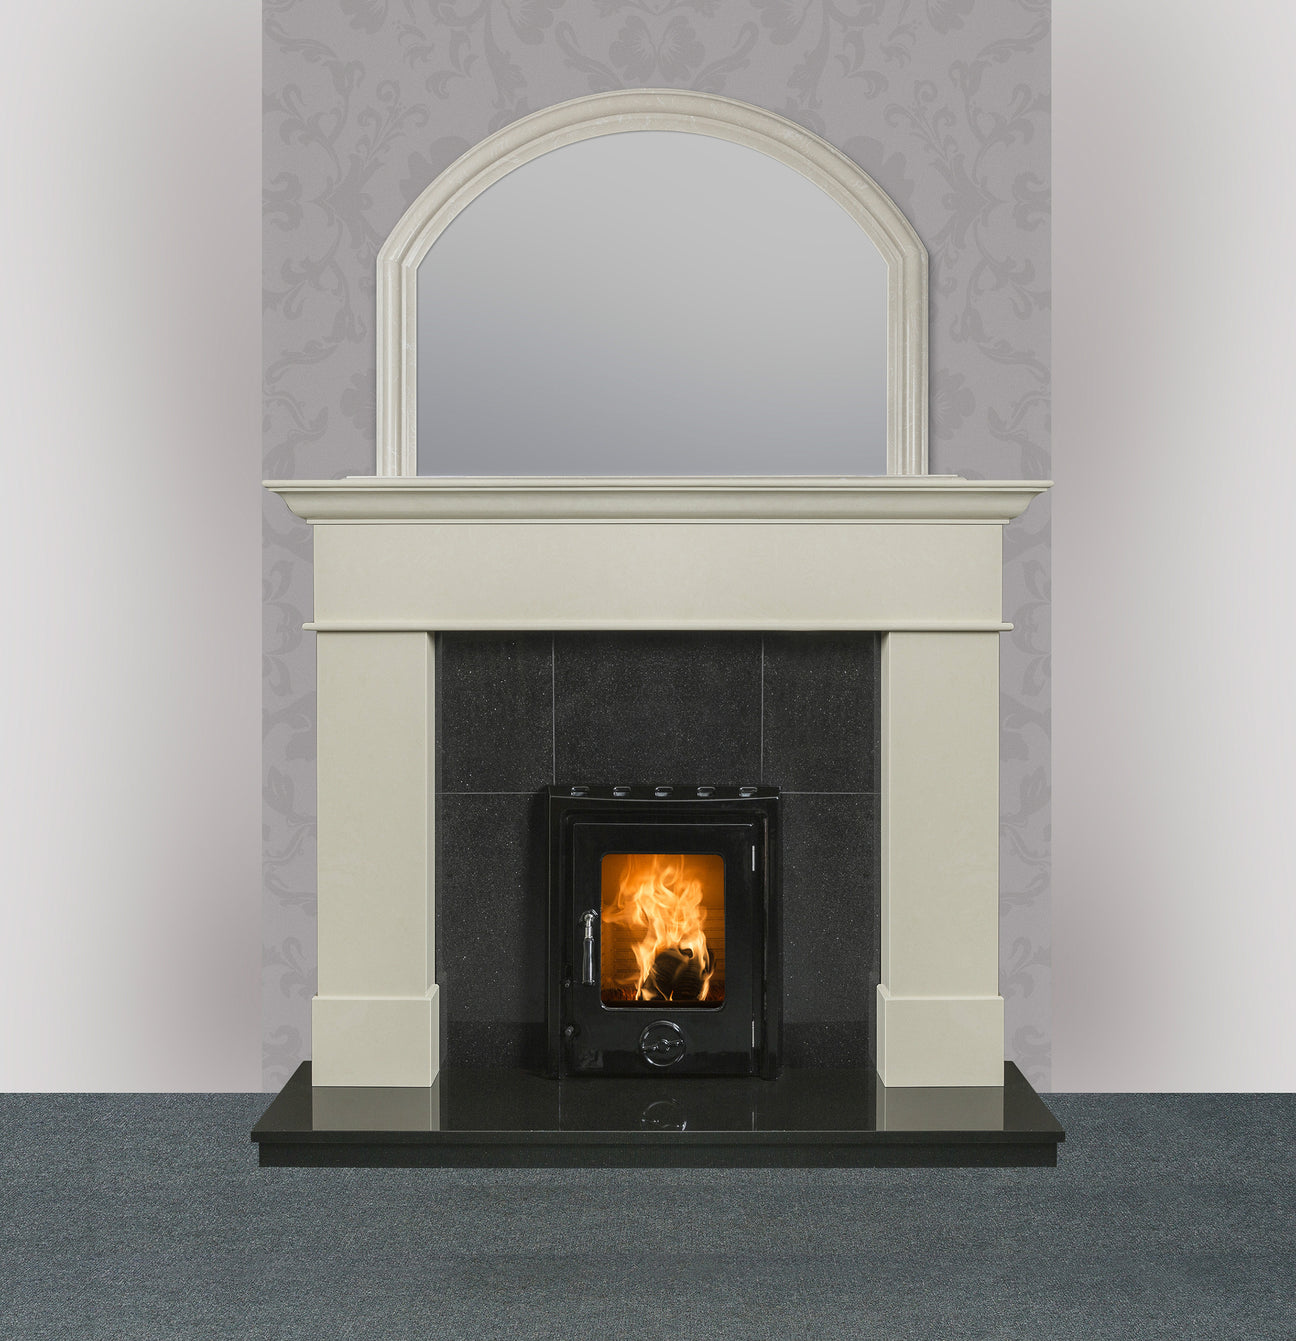 Image of Geraldton marble fireplace in ivory pearl finish with Kate insert stove enamel